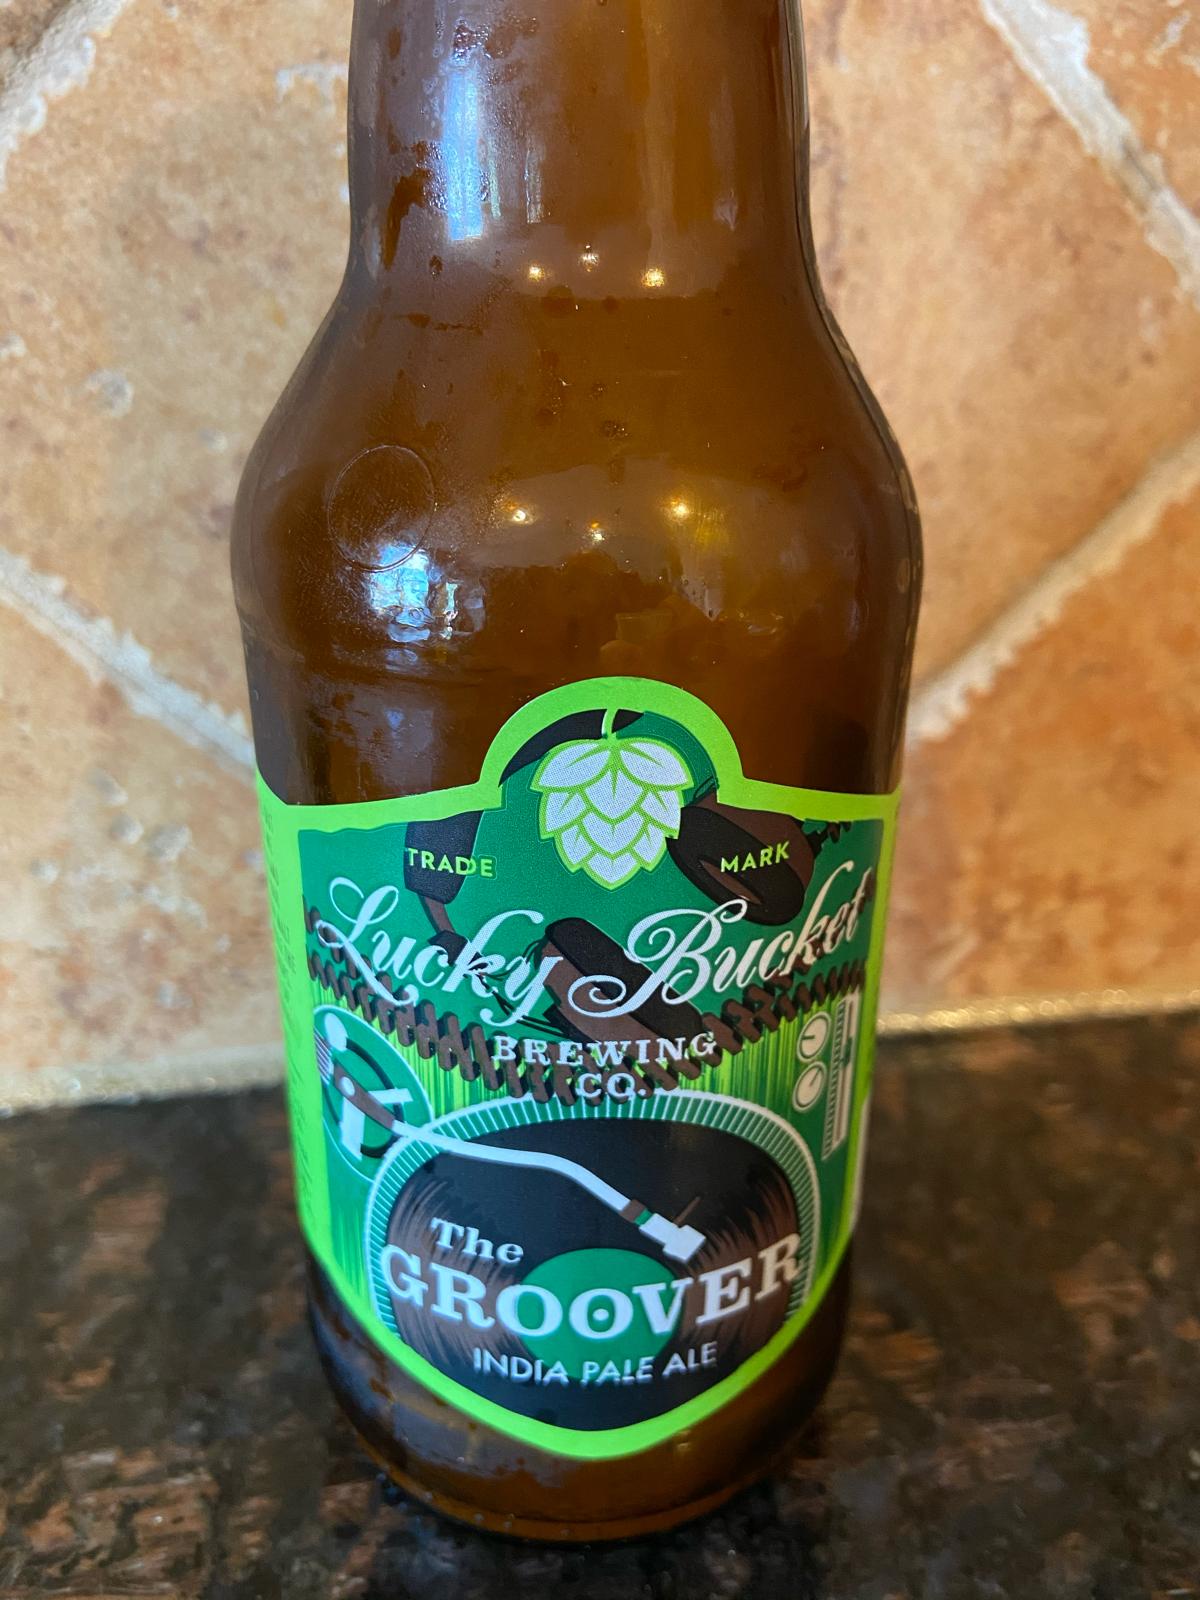 The Groover IPA